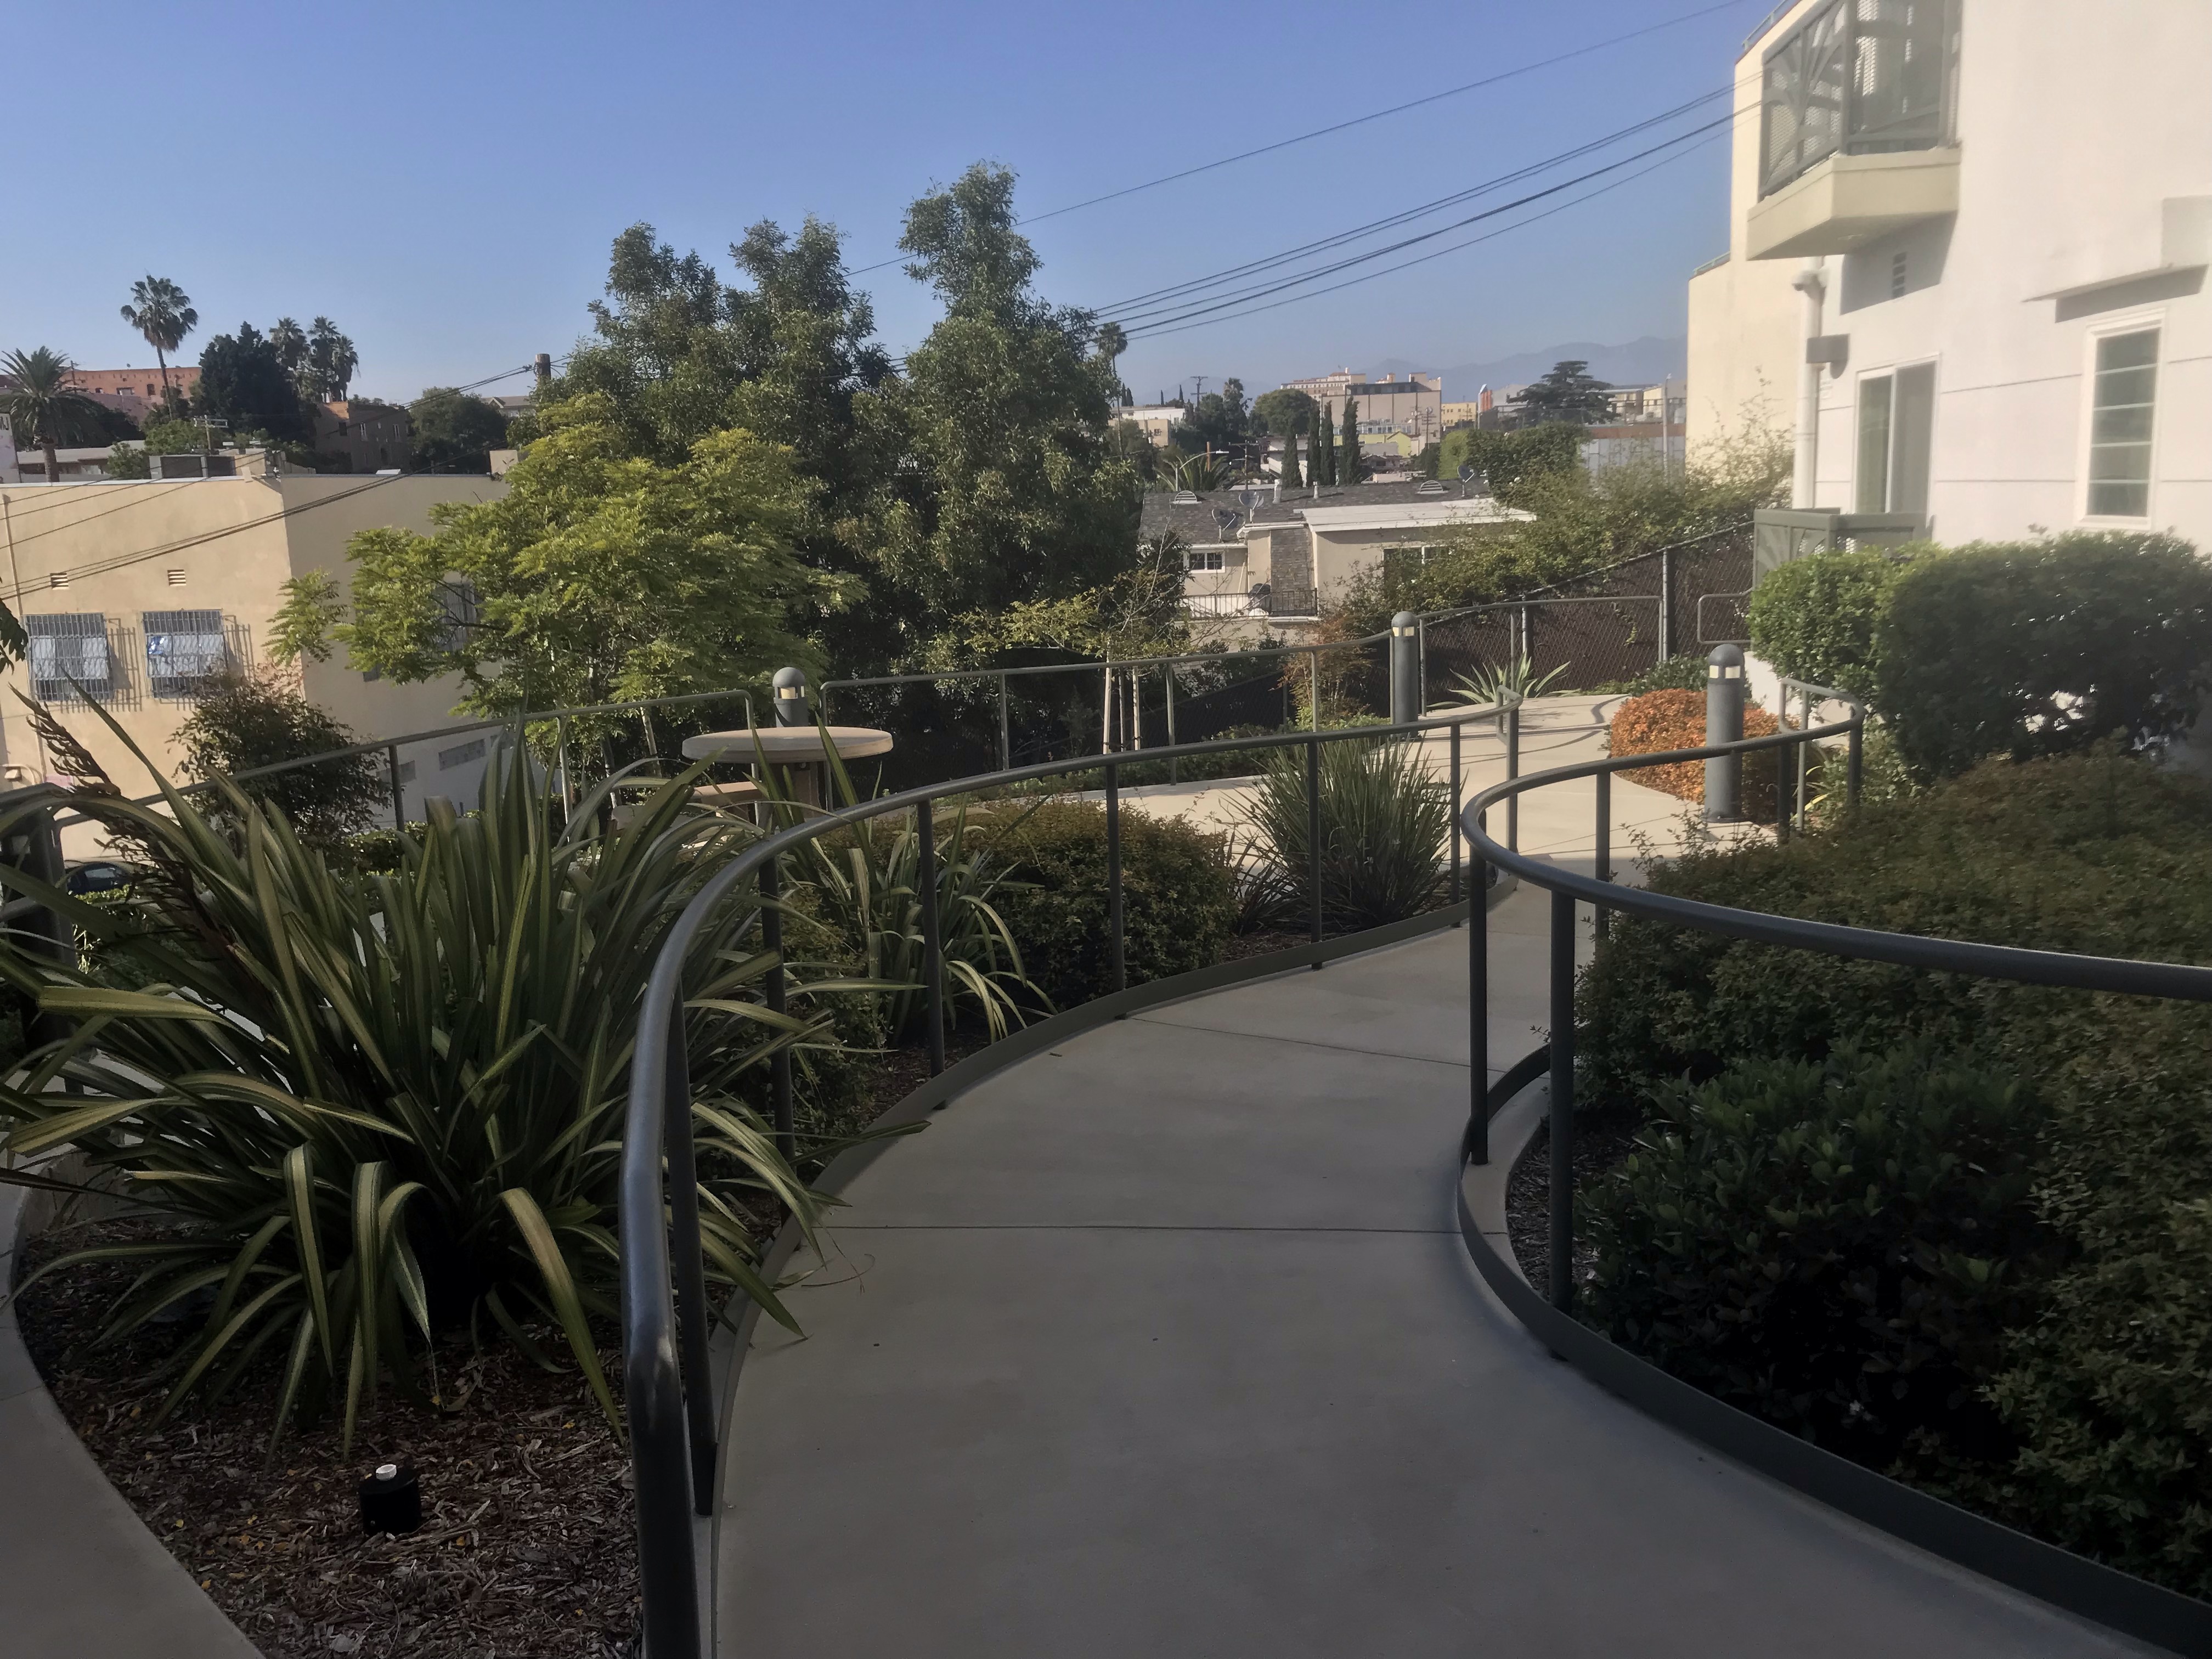 View of a concrete walkway with handrails, a lot pf bushes and plants on both sides.